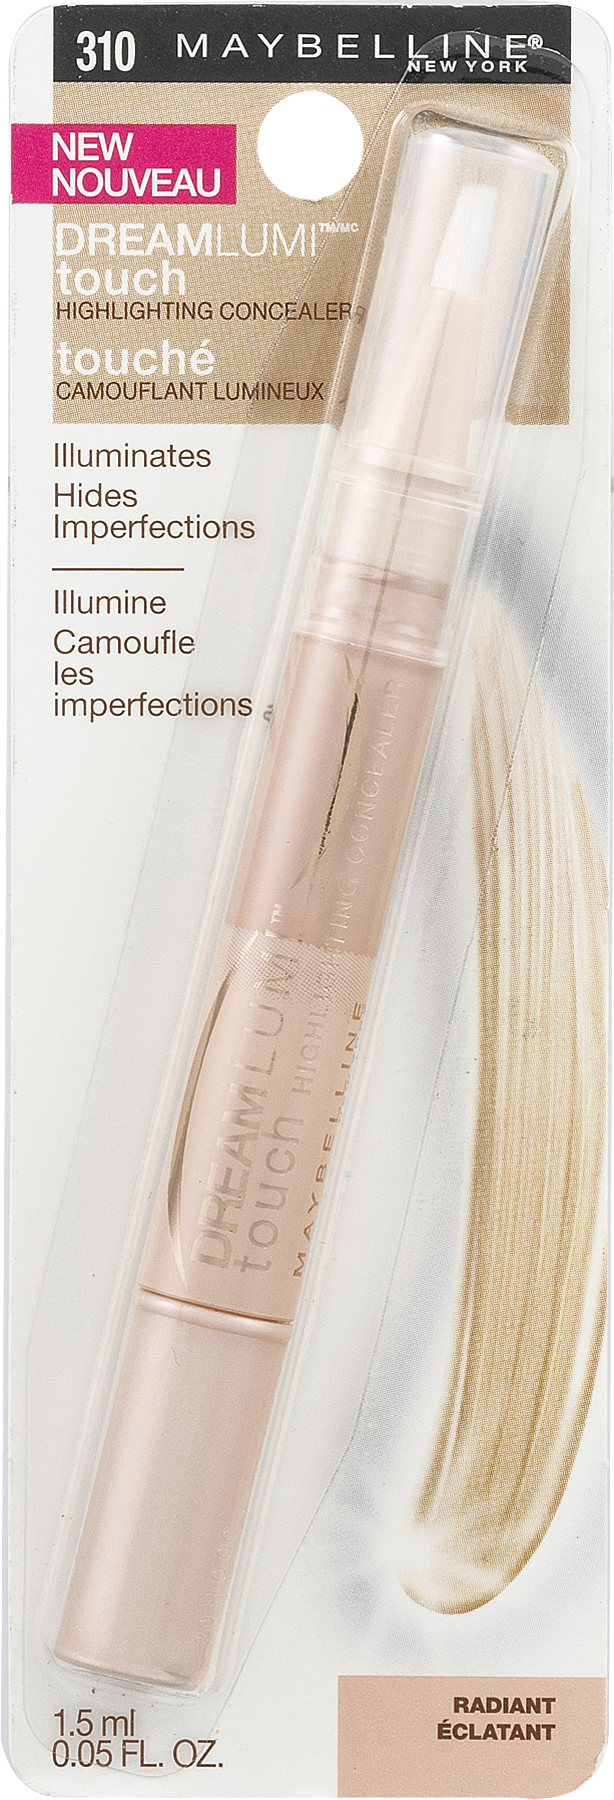 Maybelline New York Dream Lumi Touch Highlighting Concealer, Radiant - image 2 of 9